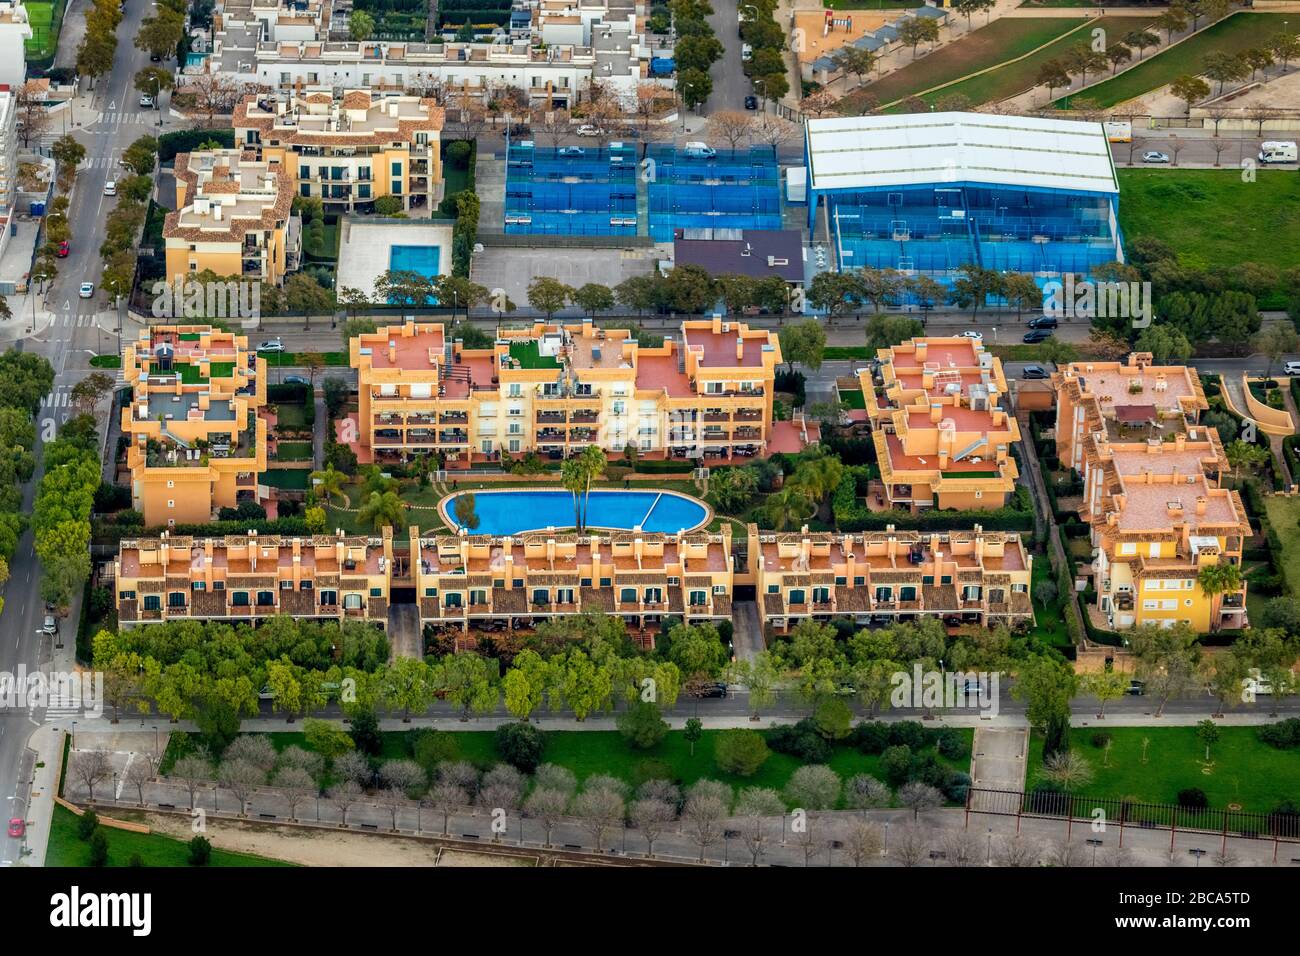 Aerial view, residential houses with pool, Palma Padel, padel tennis court, Palma, Mallorca, Spain, Europe, Balearic Islands Stock Photo